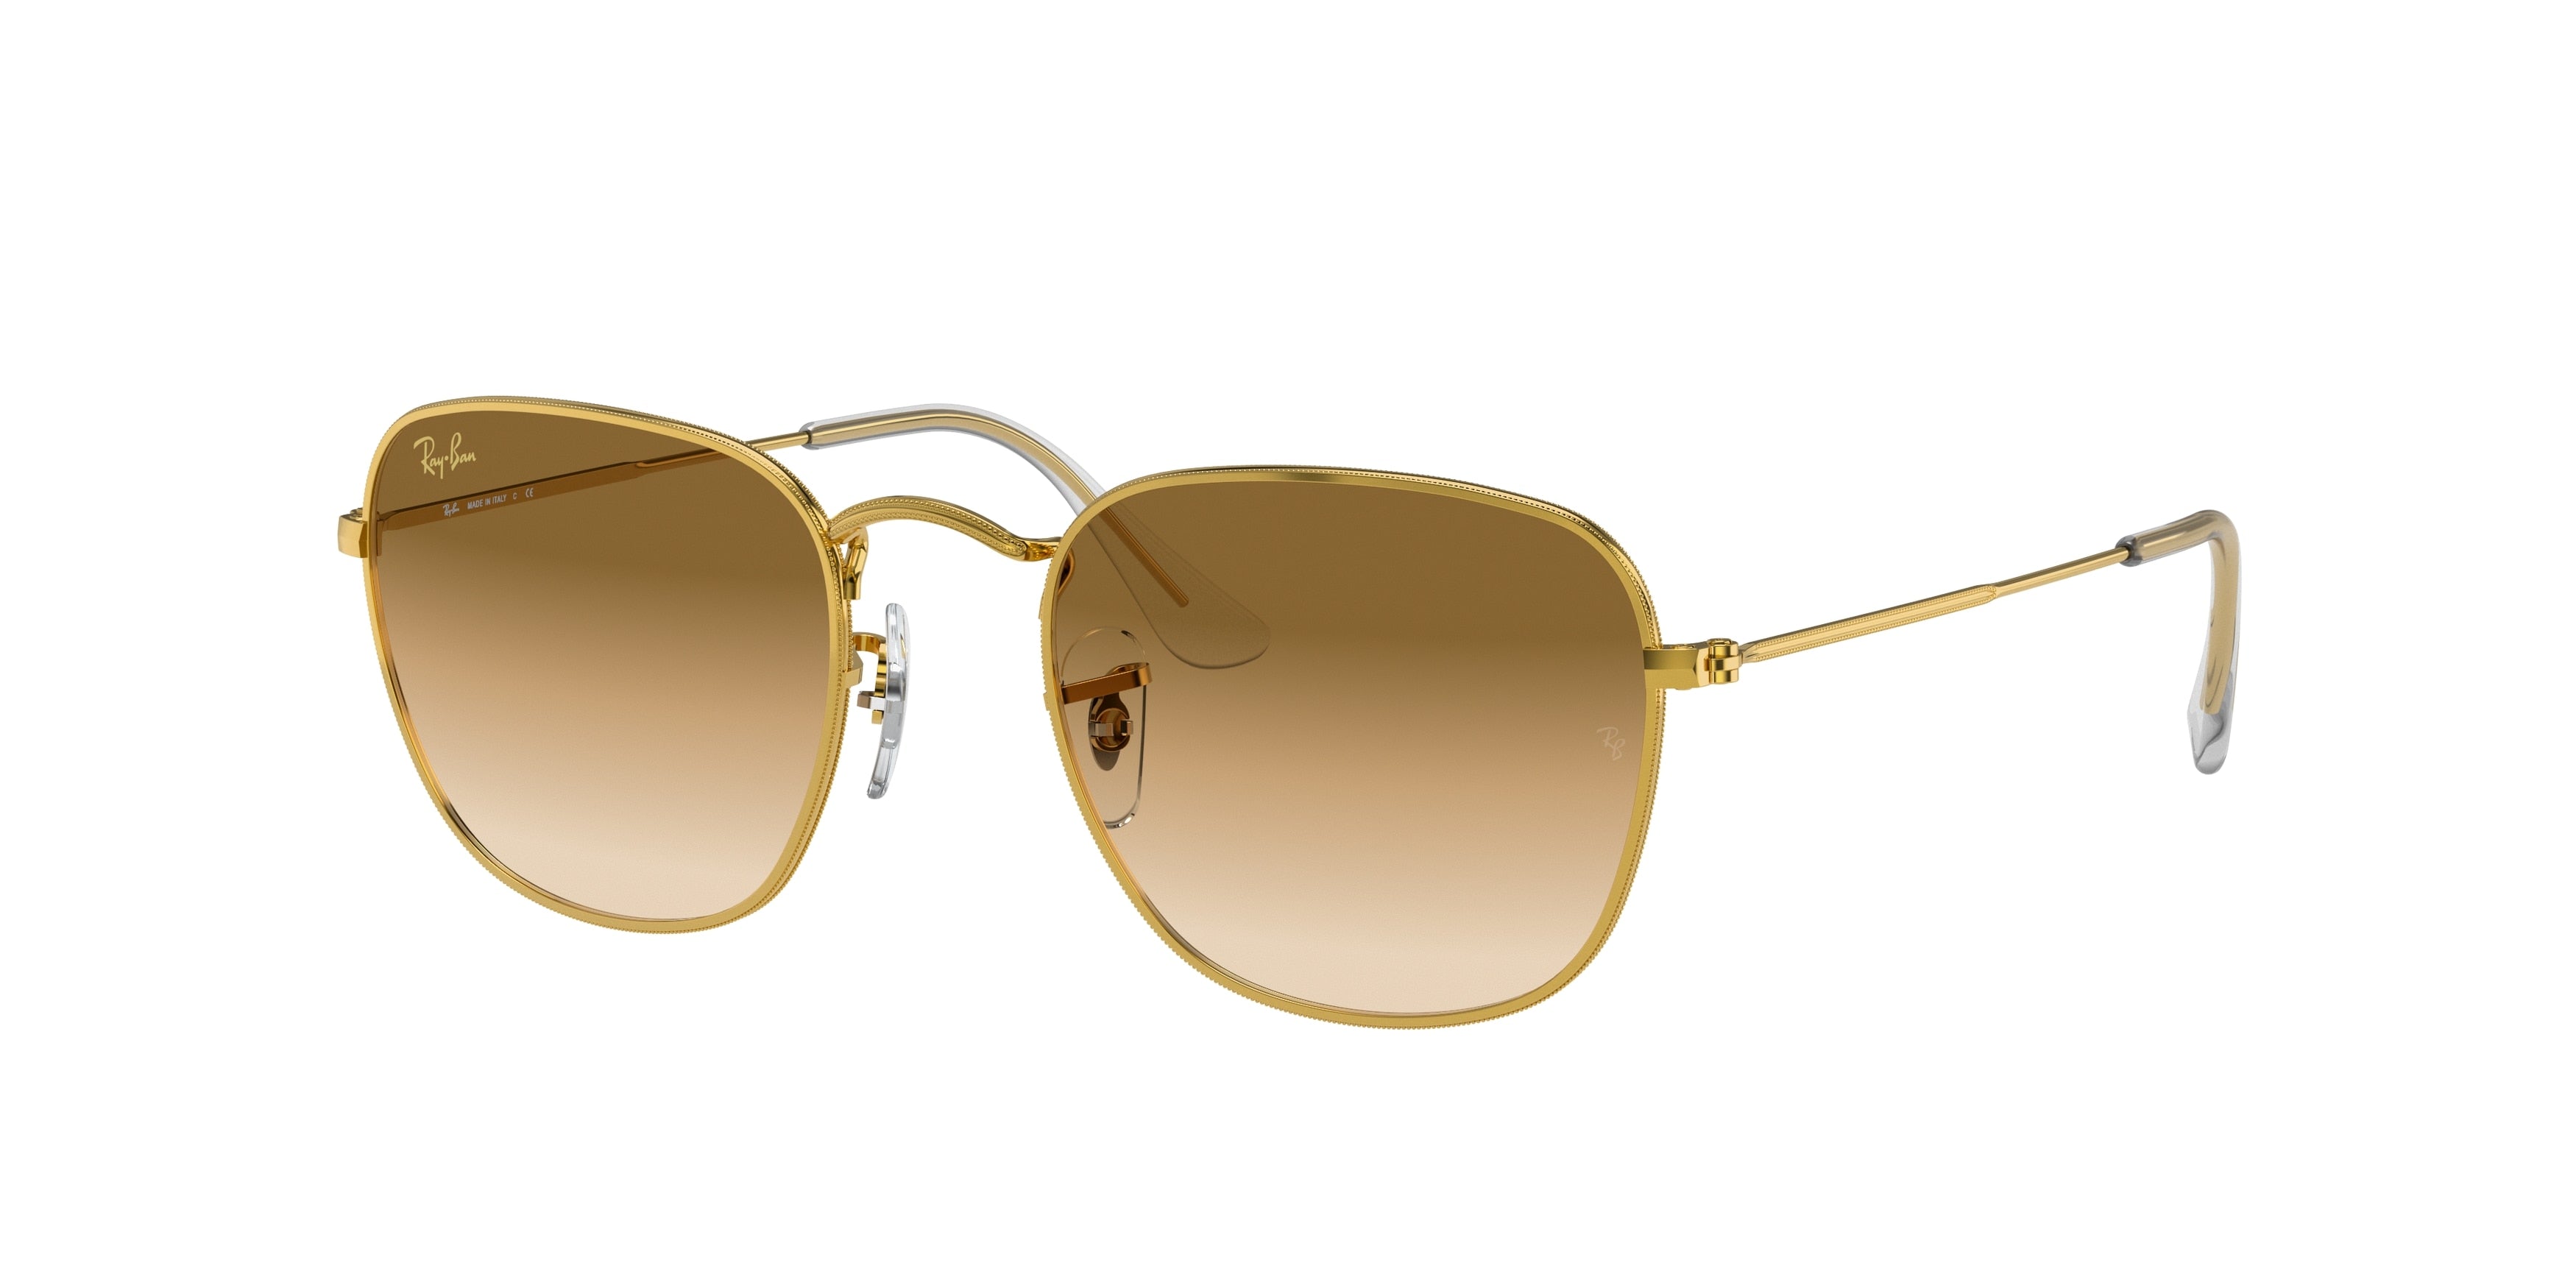 Ray-Ban FRANK RB3857 Square Sunglasses  919651-Gold 50-145-20 - Color Map Gold